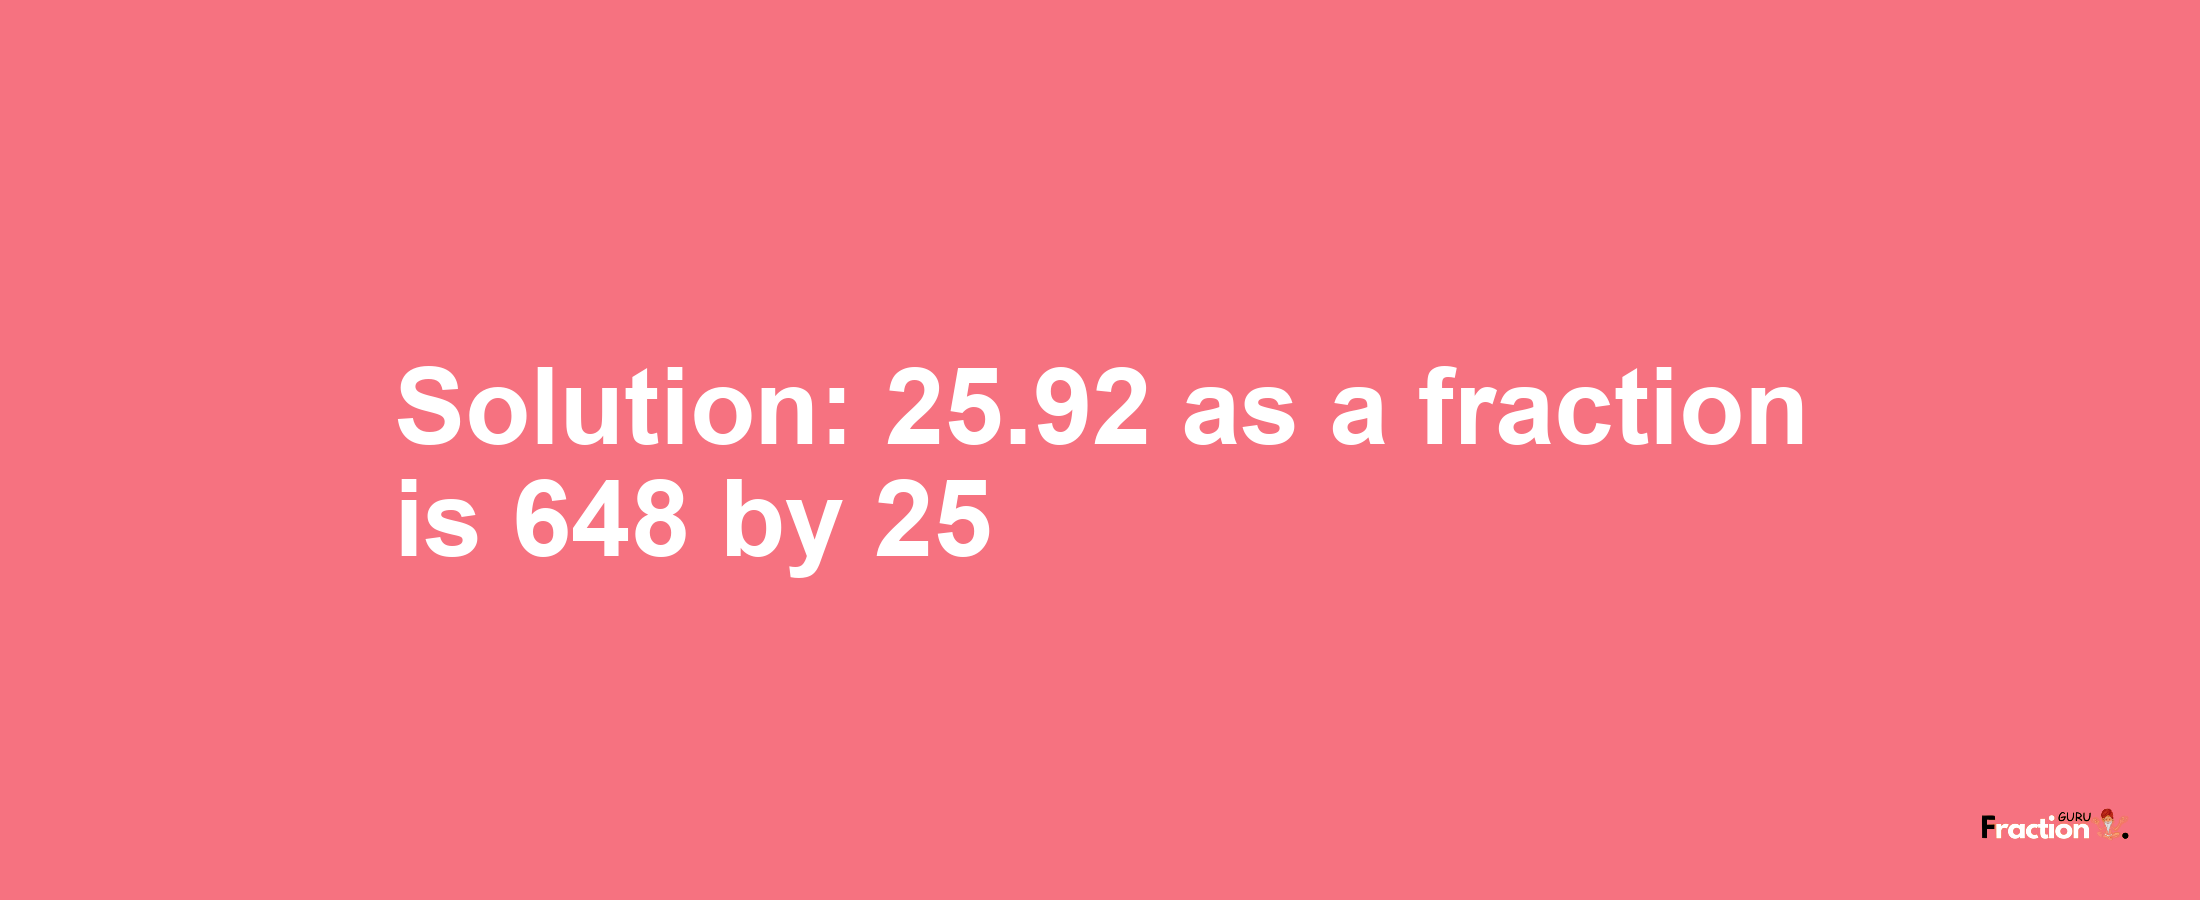 Solution:25.92 as a fraction is 648/25